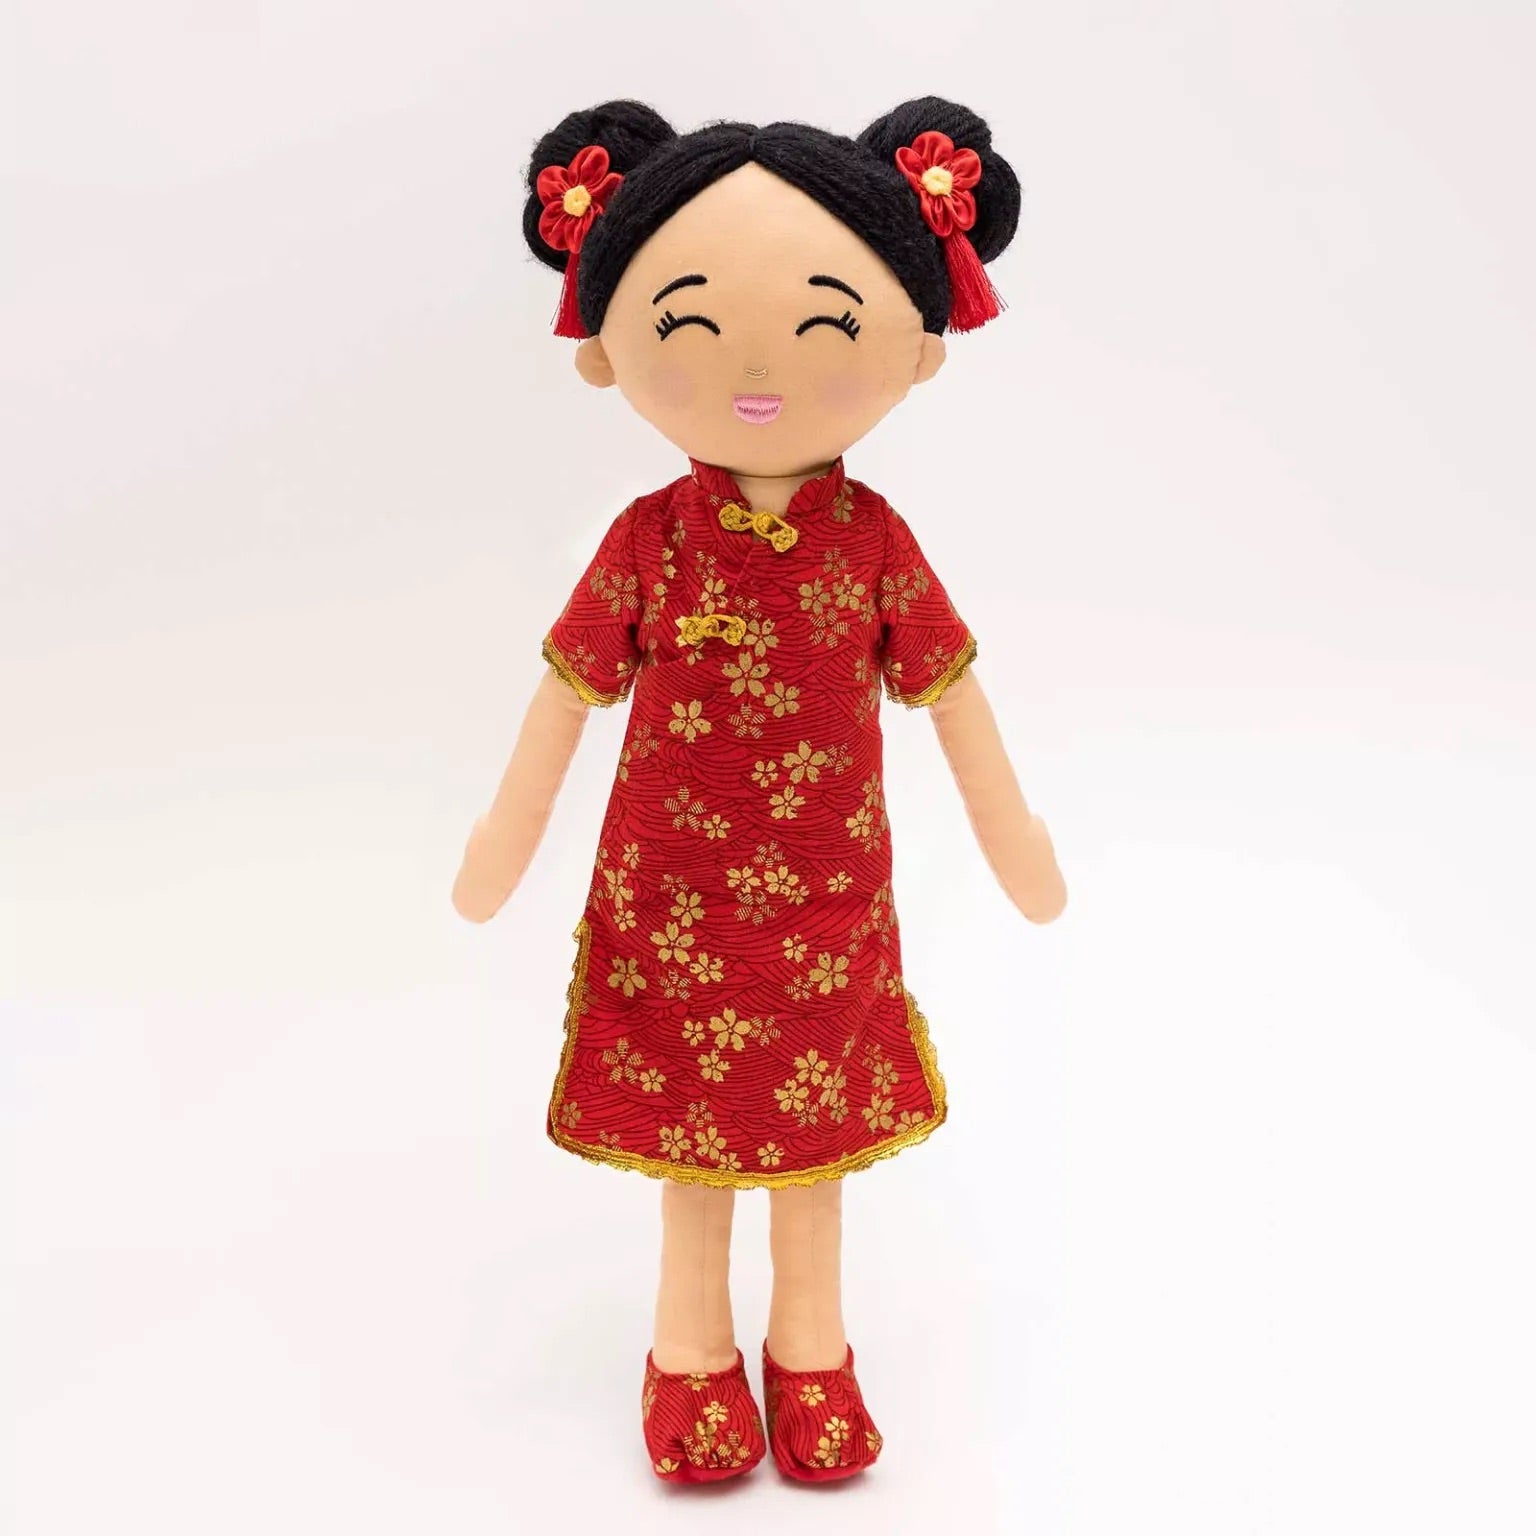 Chinese 'Mei' Cultural Doll